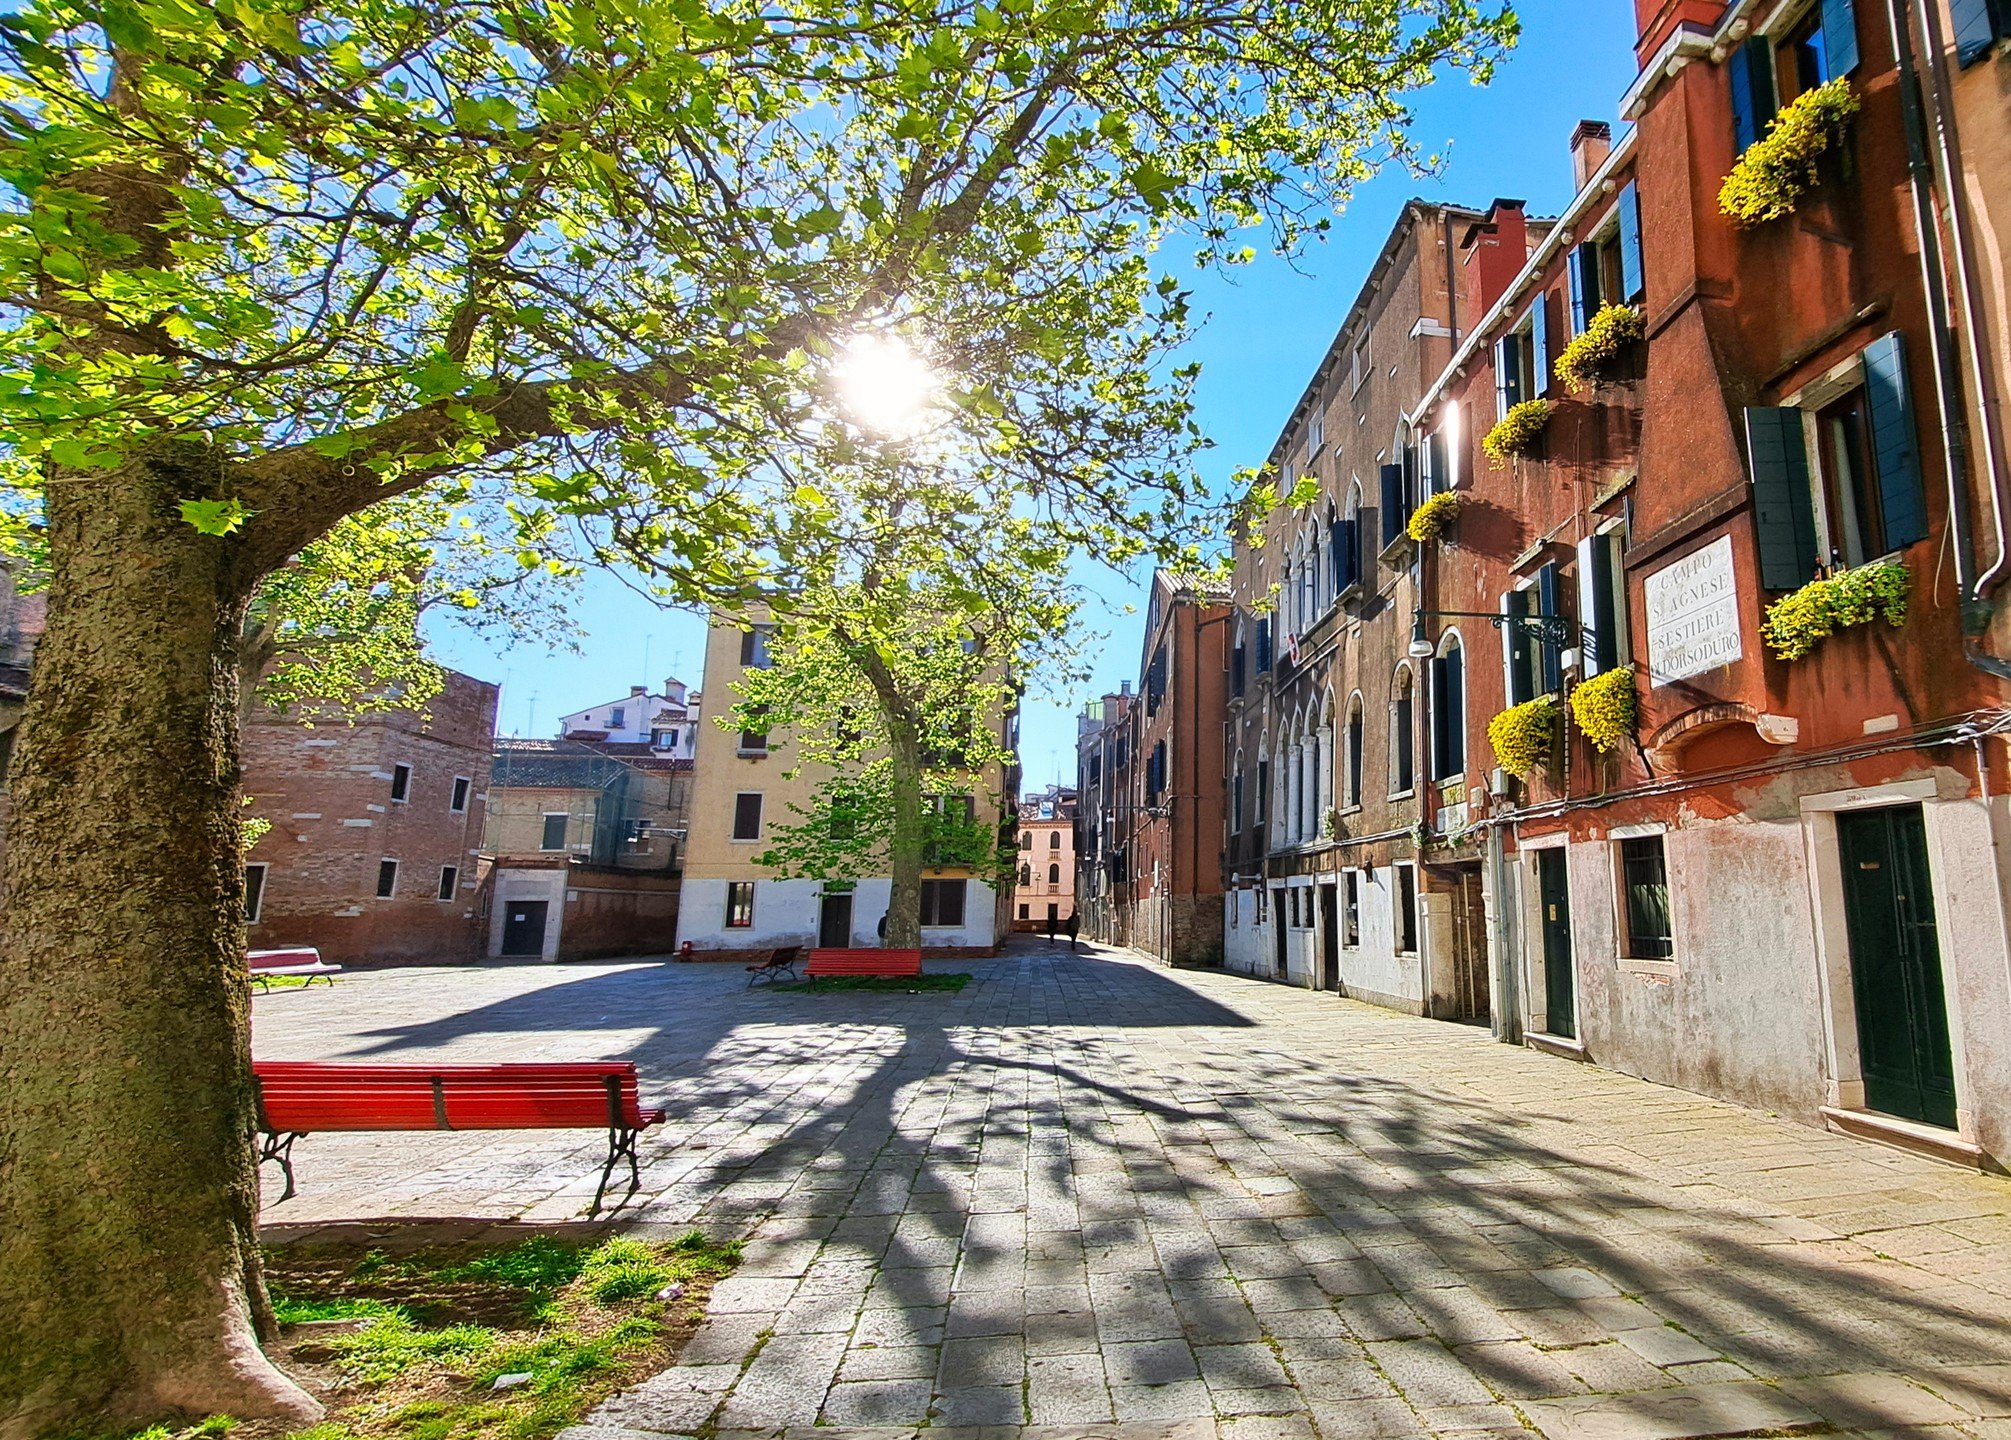 This tranquil scene captured in the Dorsoduro area of Venice exudes the timeless charm of La Serenissima. The warm sunlight filters through the lush green leaves, casting a lacework of shadows on the cobblestone piazza. A row of vermilion buildings, 